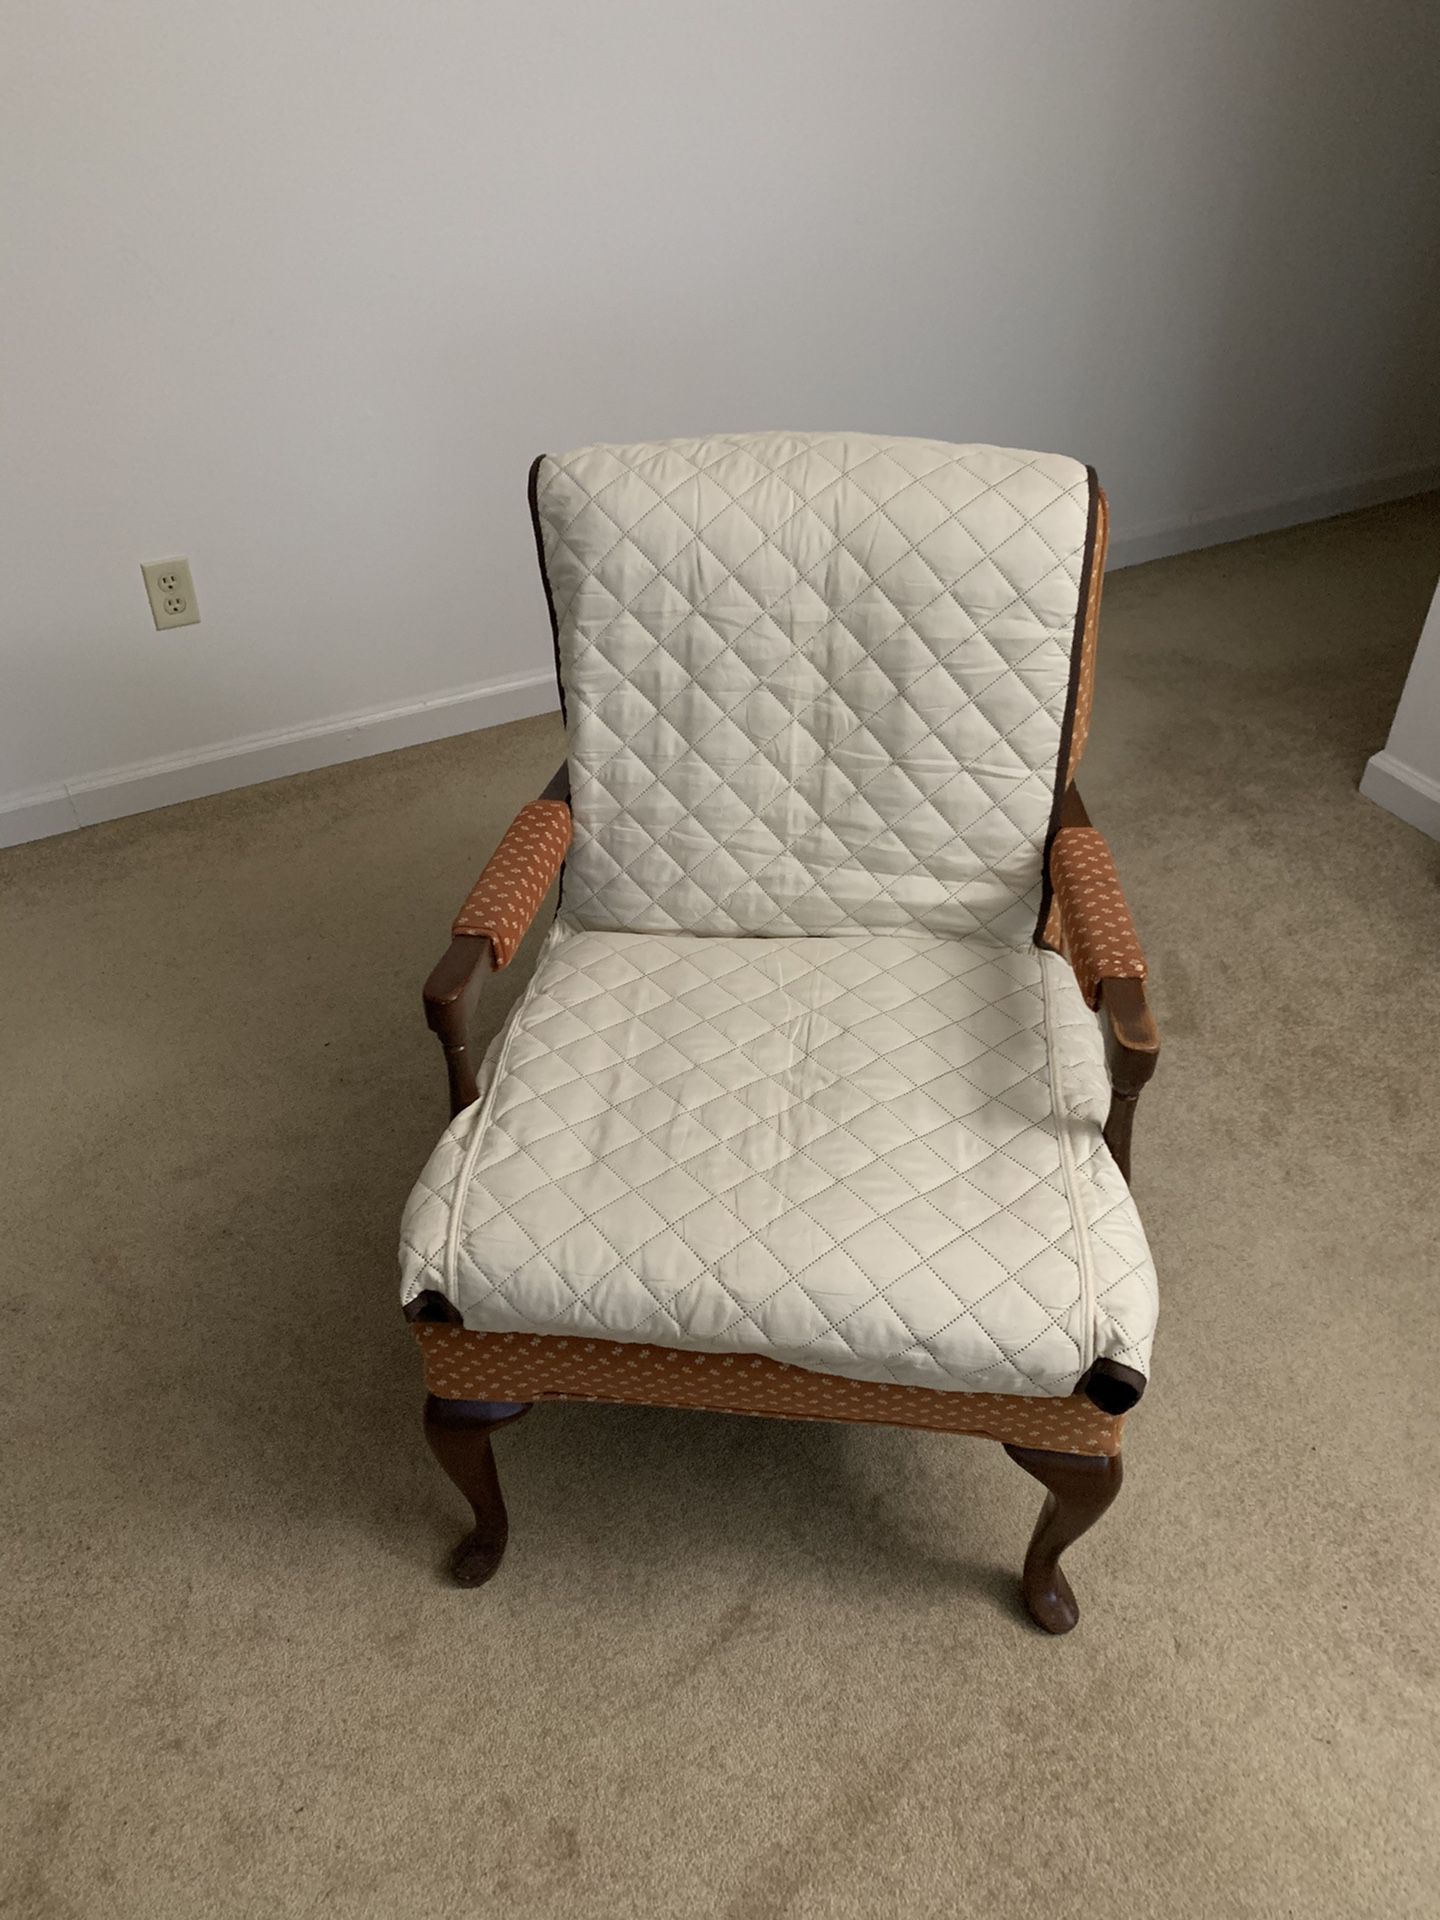 Recliners Chair